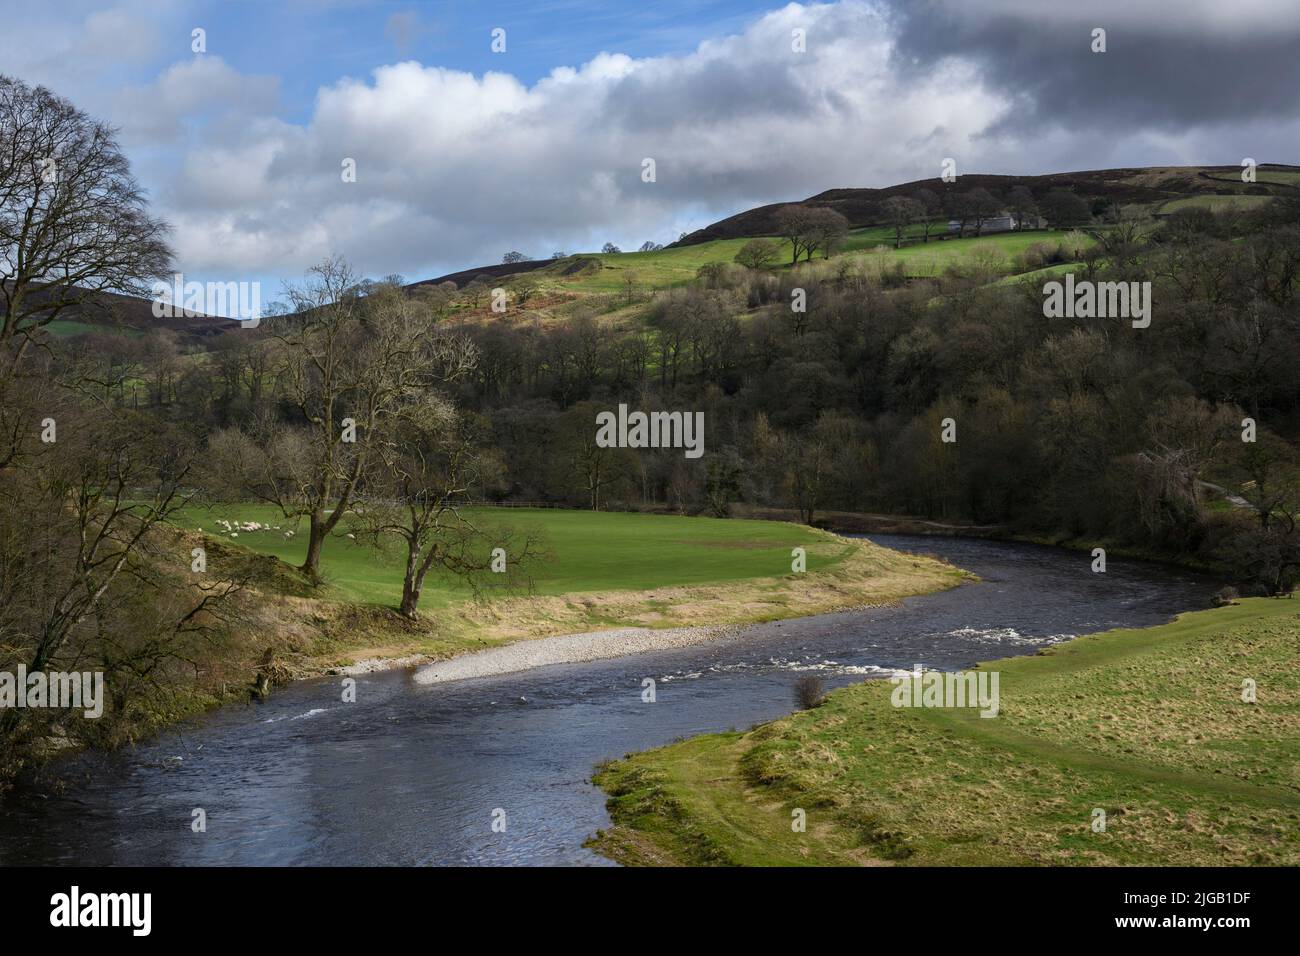 River Wharfe in scenic rural landscape (sloping valley side, sunlit hills, banks of river) - Bolton Abbey Estate, Wharfedale, Yorkshire Dales, GB, UK. Stock Photo